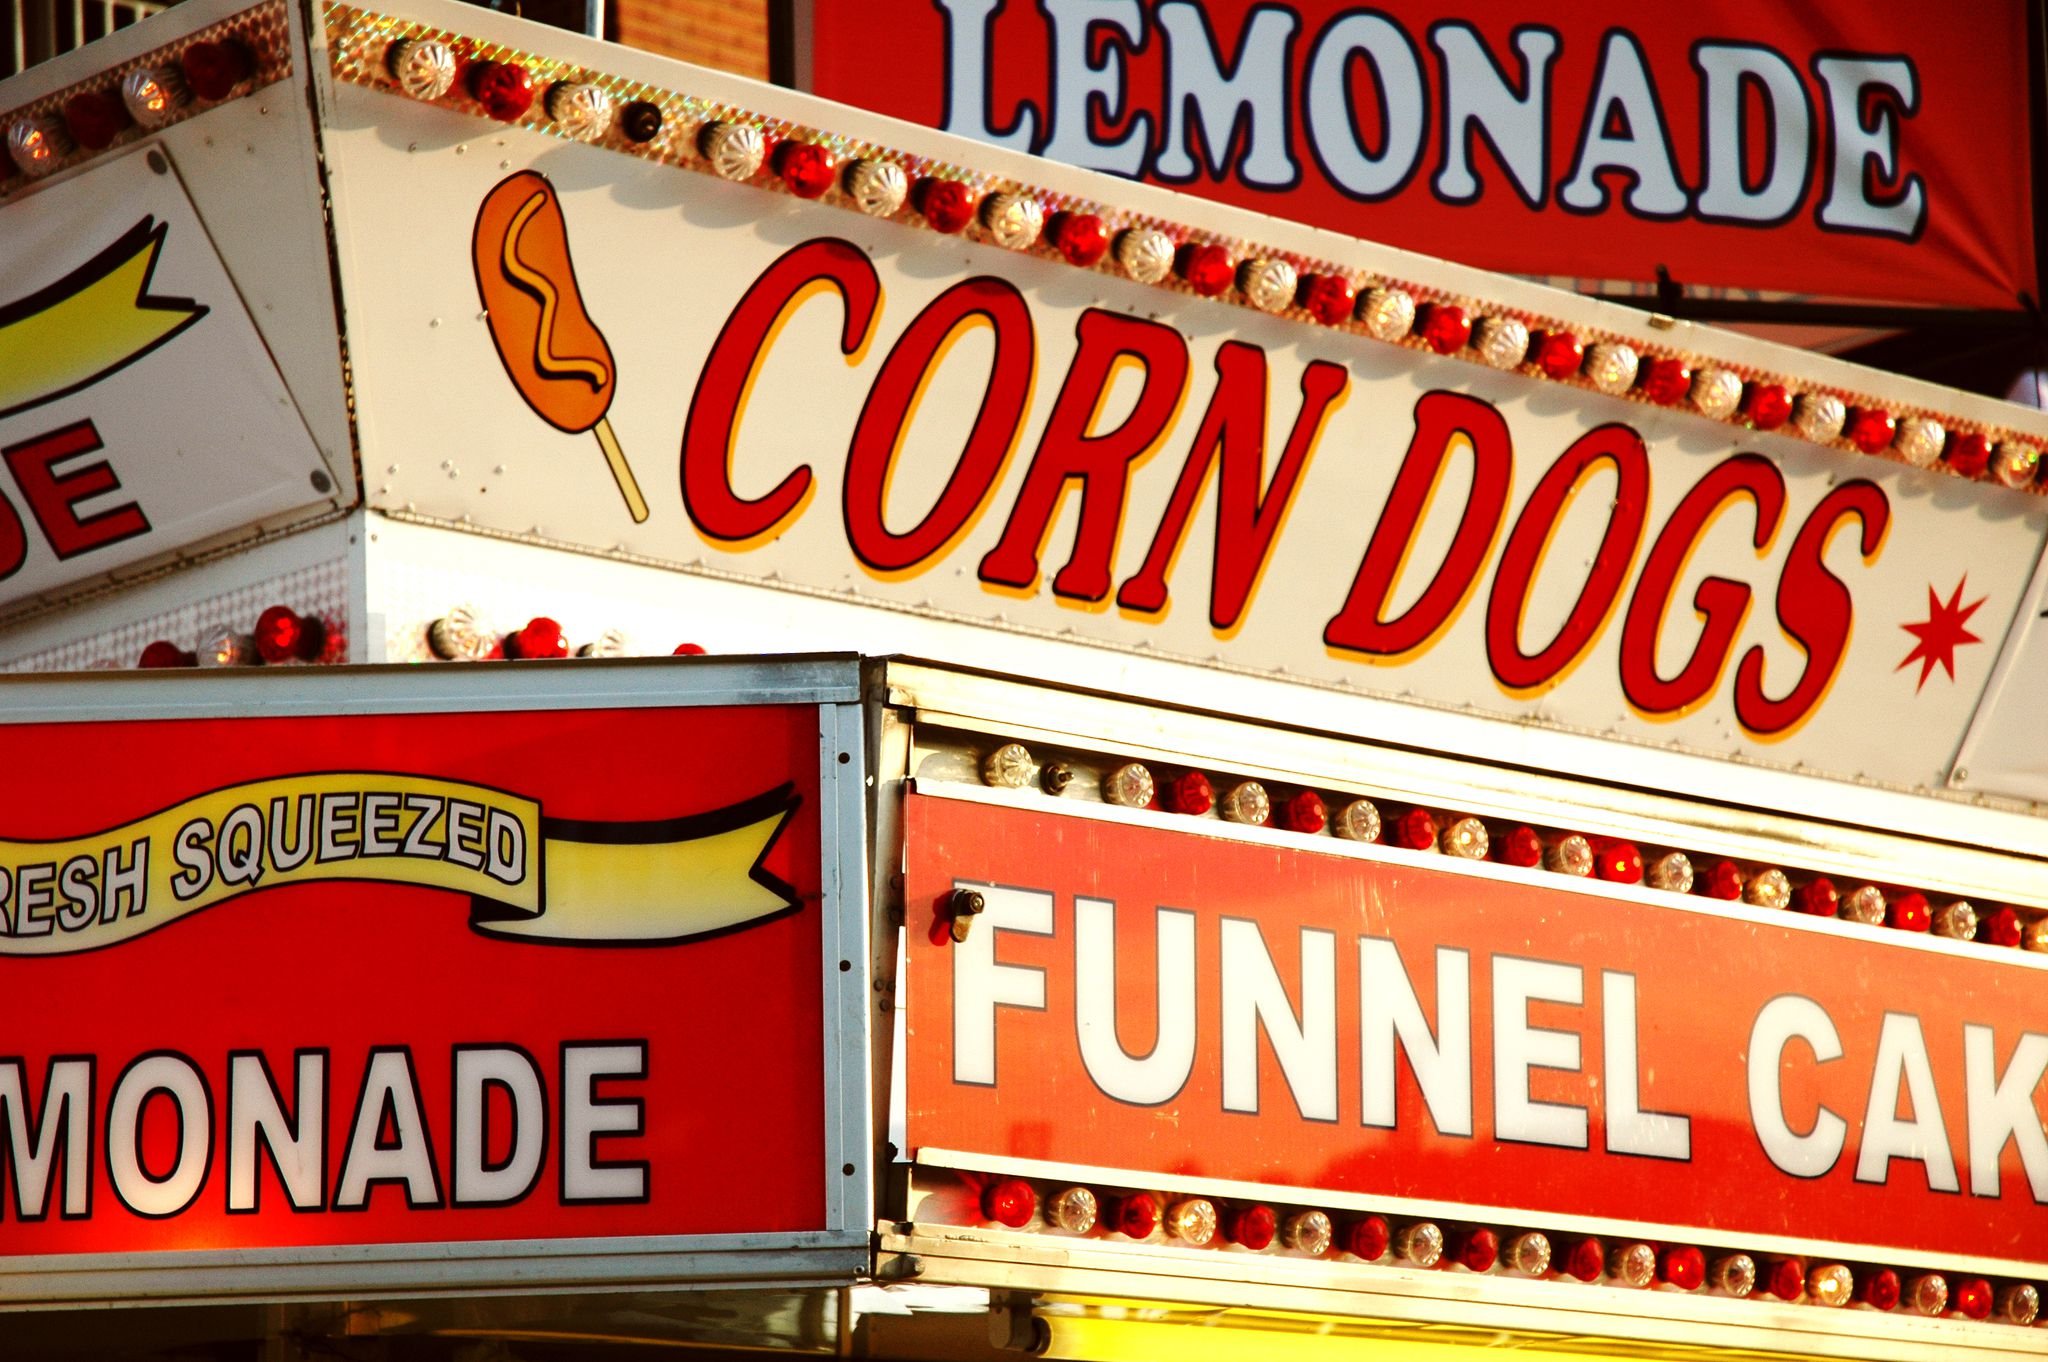 Local fairs are open for drive-up takeout this summer, so we ranked their 5 best classic foods